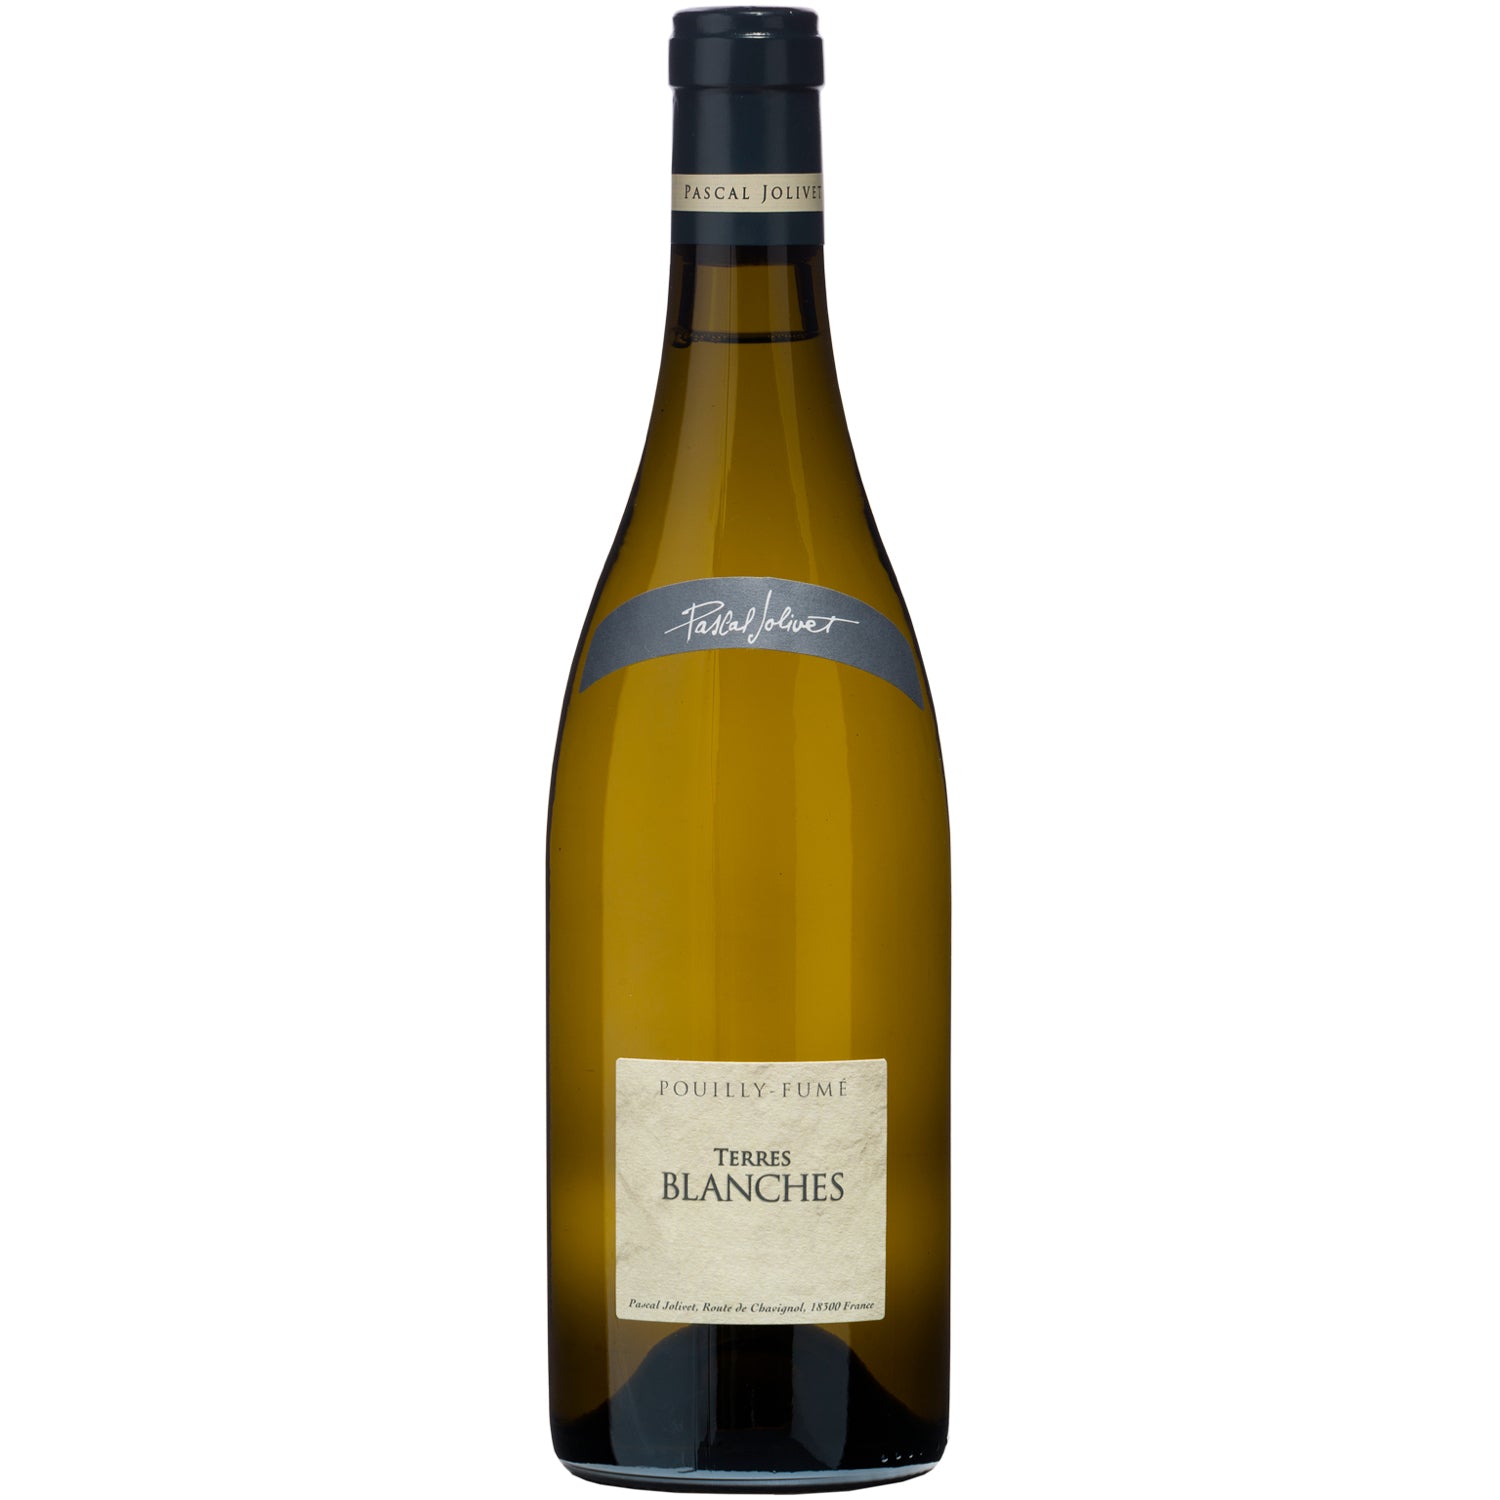 Pascal Jolivet Pouilly Fumé Terres Blanches [750ml]